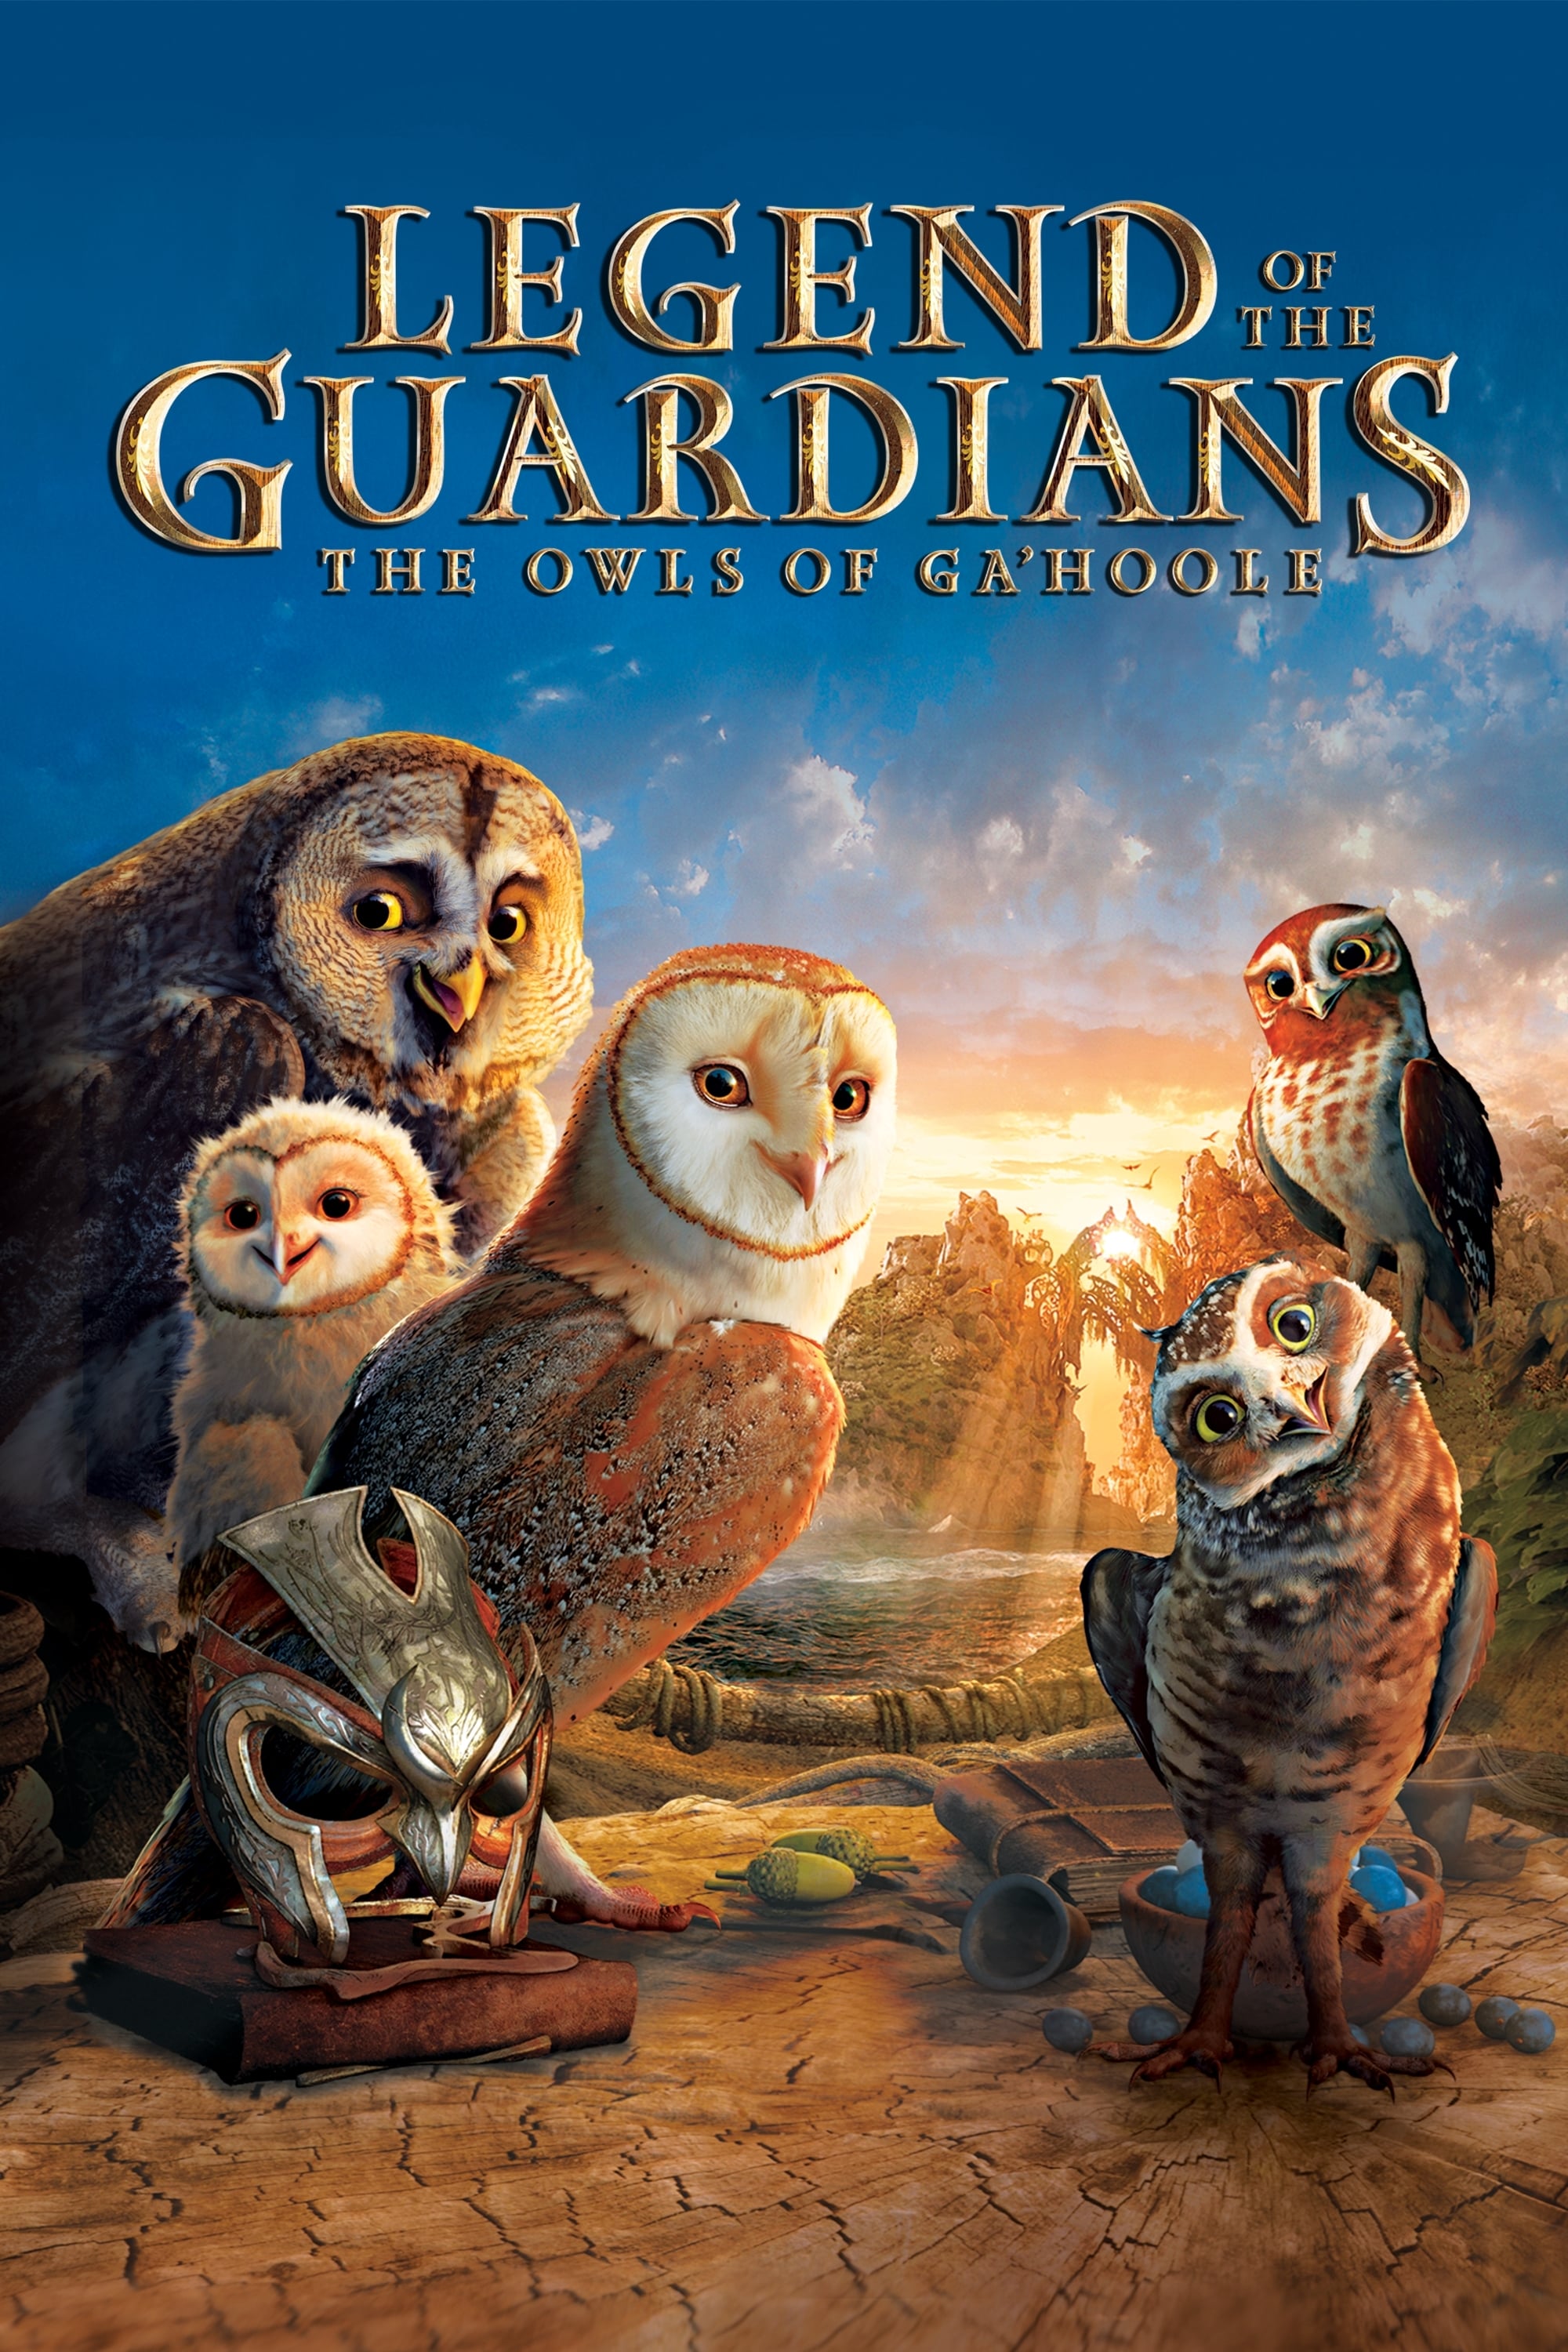 Legend of the Guardians: The Owls of Ga'Hoole (2010)